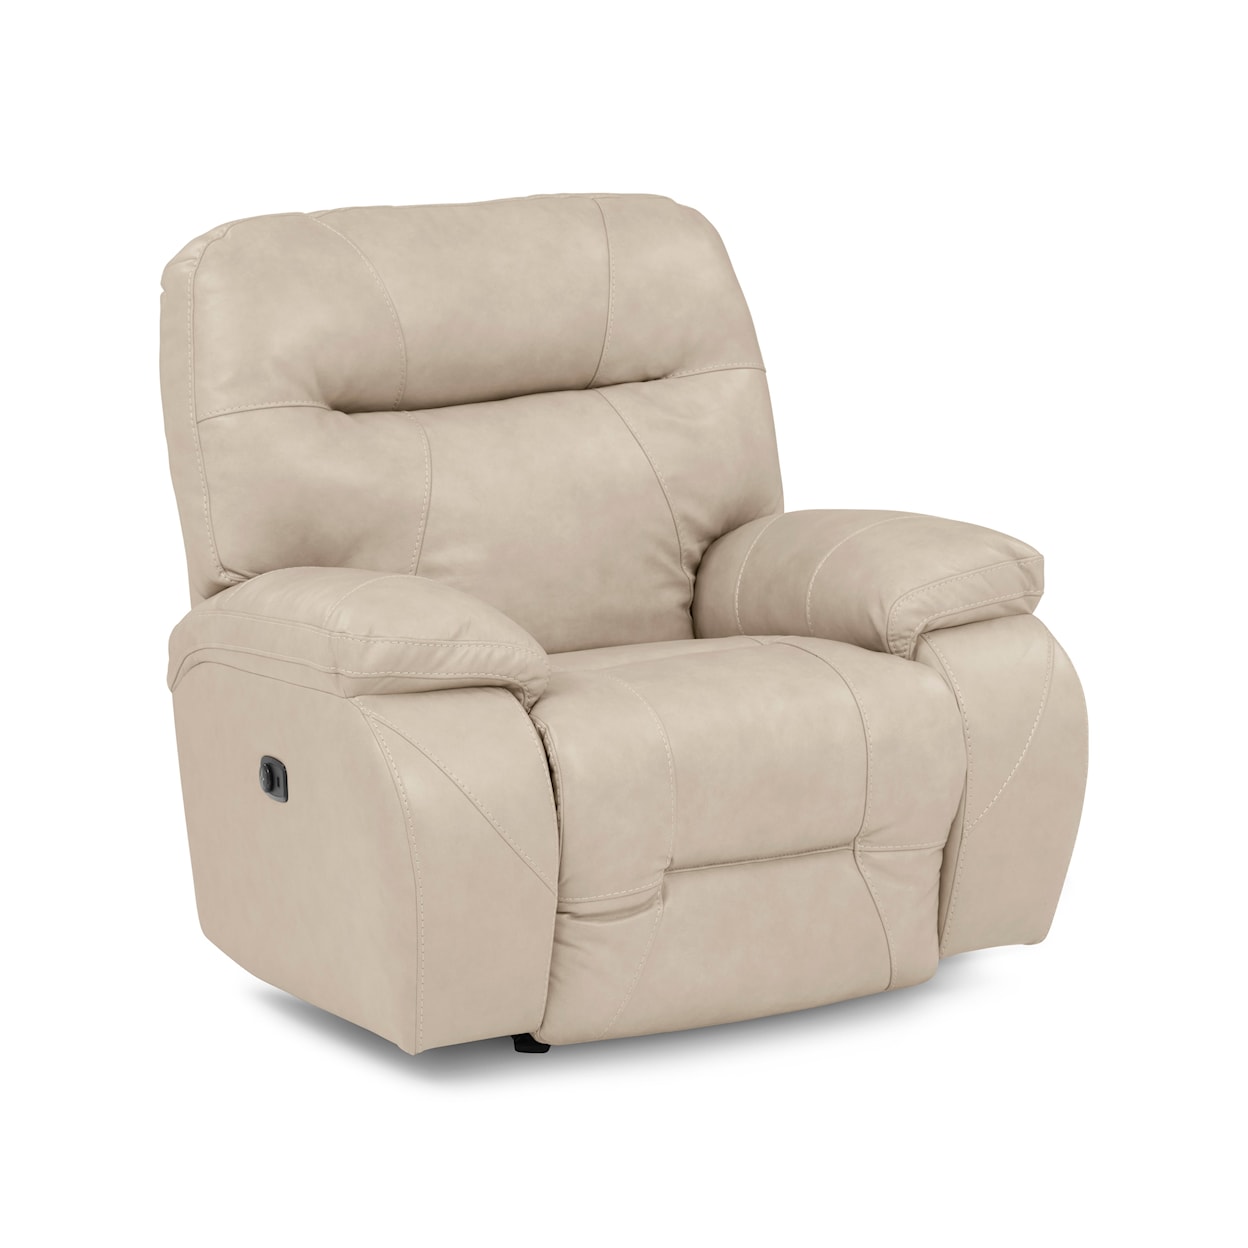 Best Home Furnishings Arial Power Space Saver Recliner